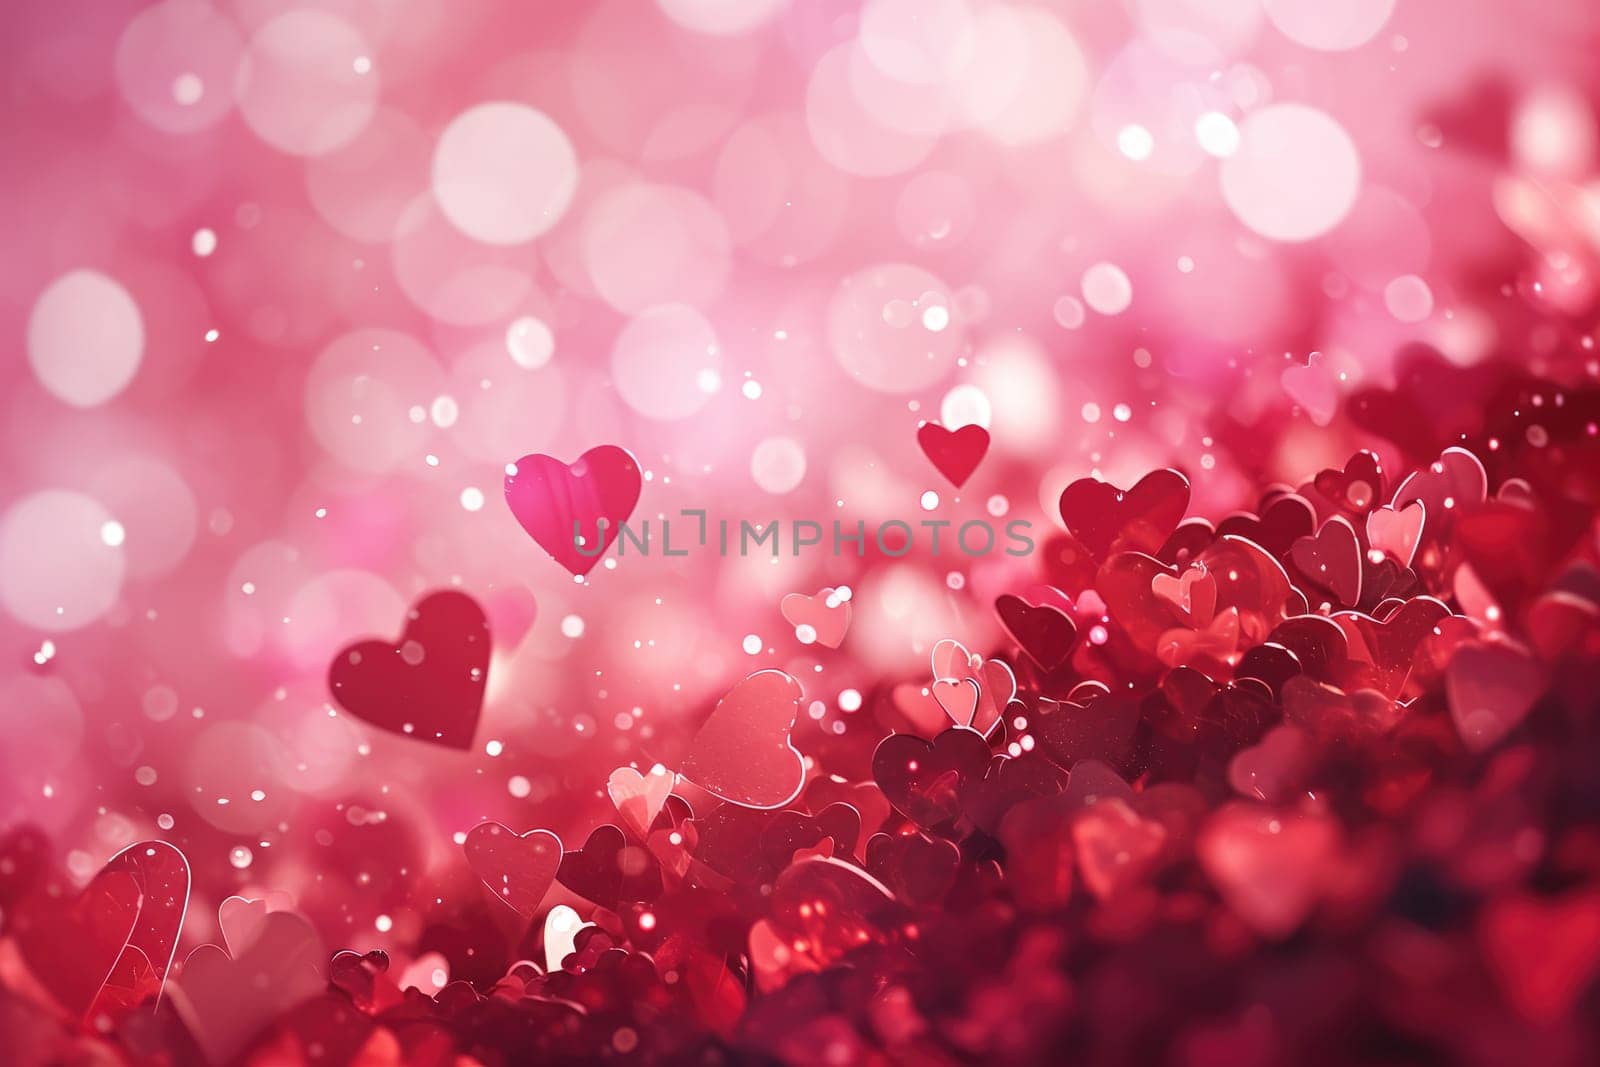 a romantic Valentine's Day background with a blend of soft pink and heart shaped elements by nijieimu